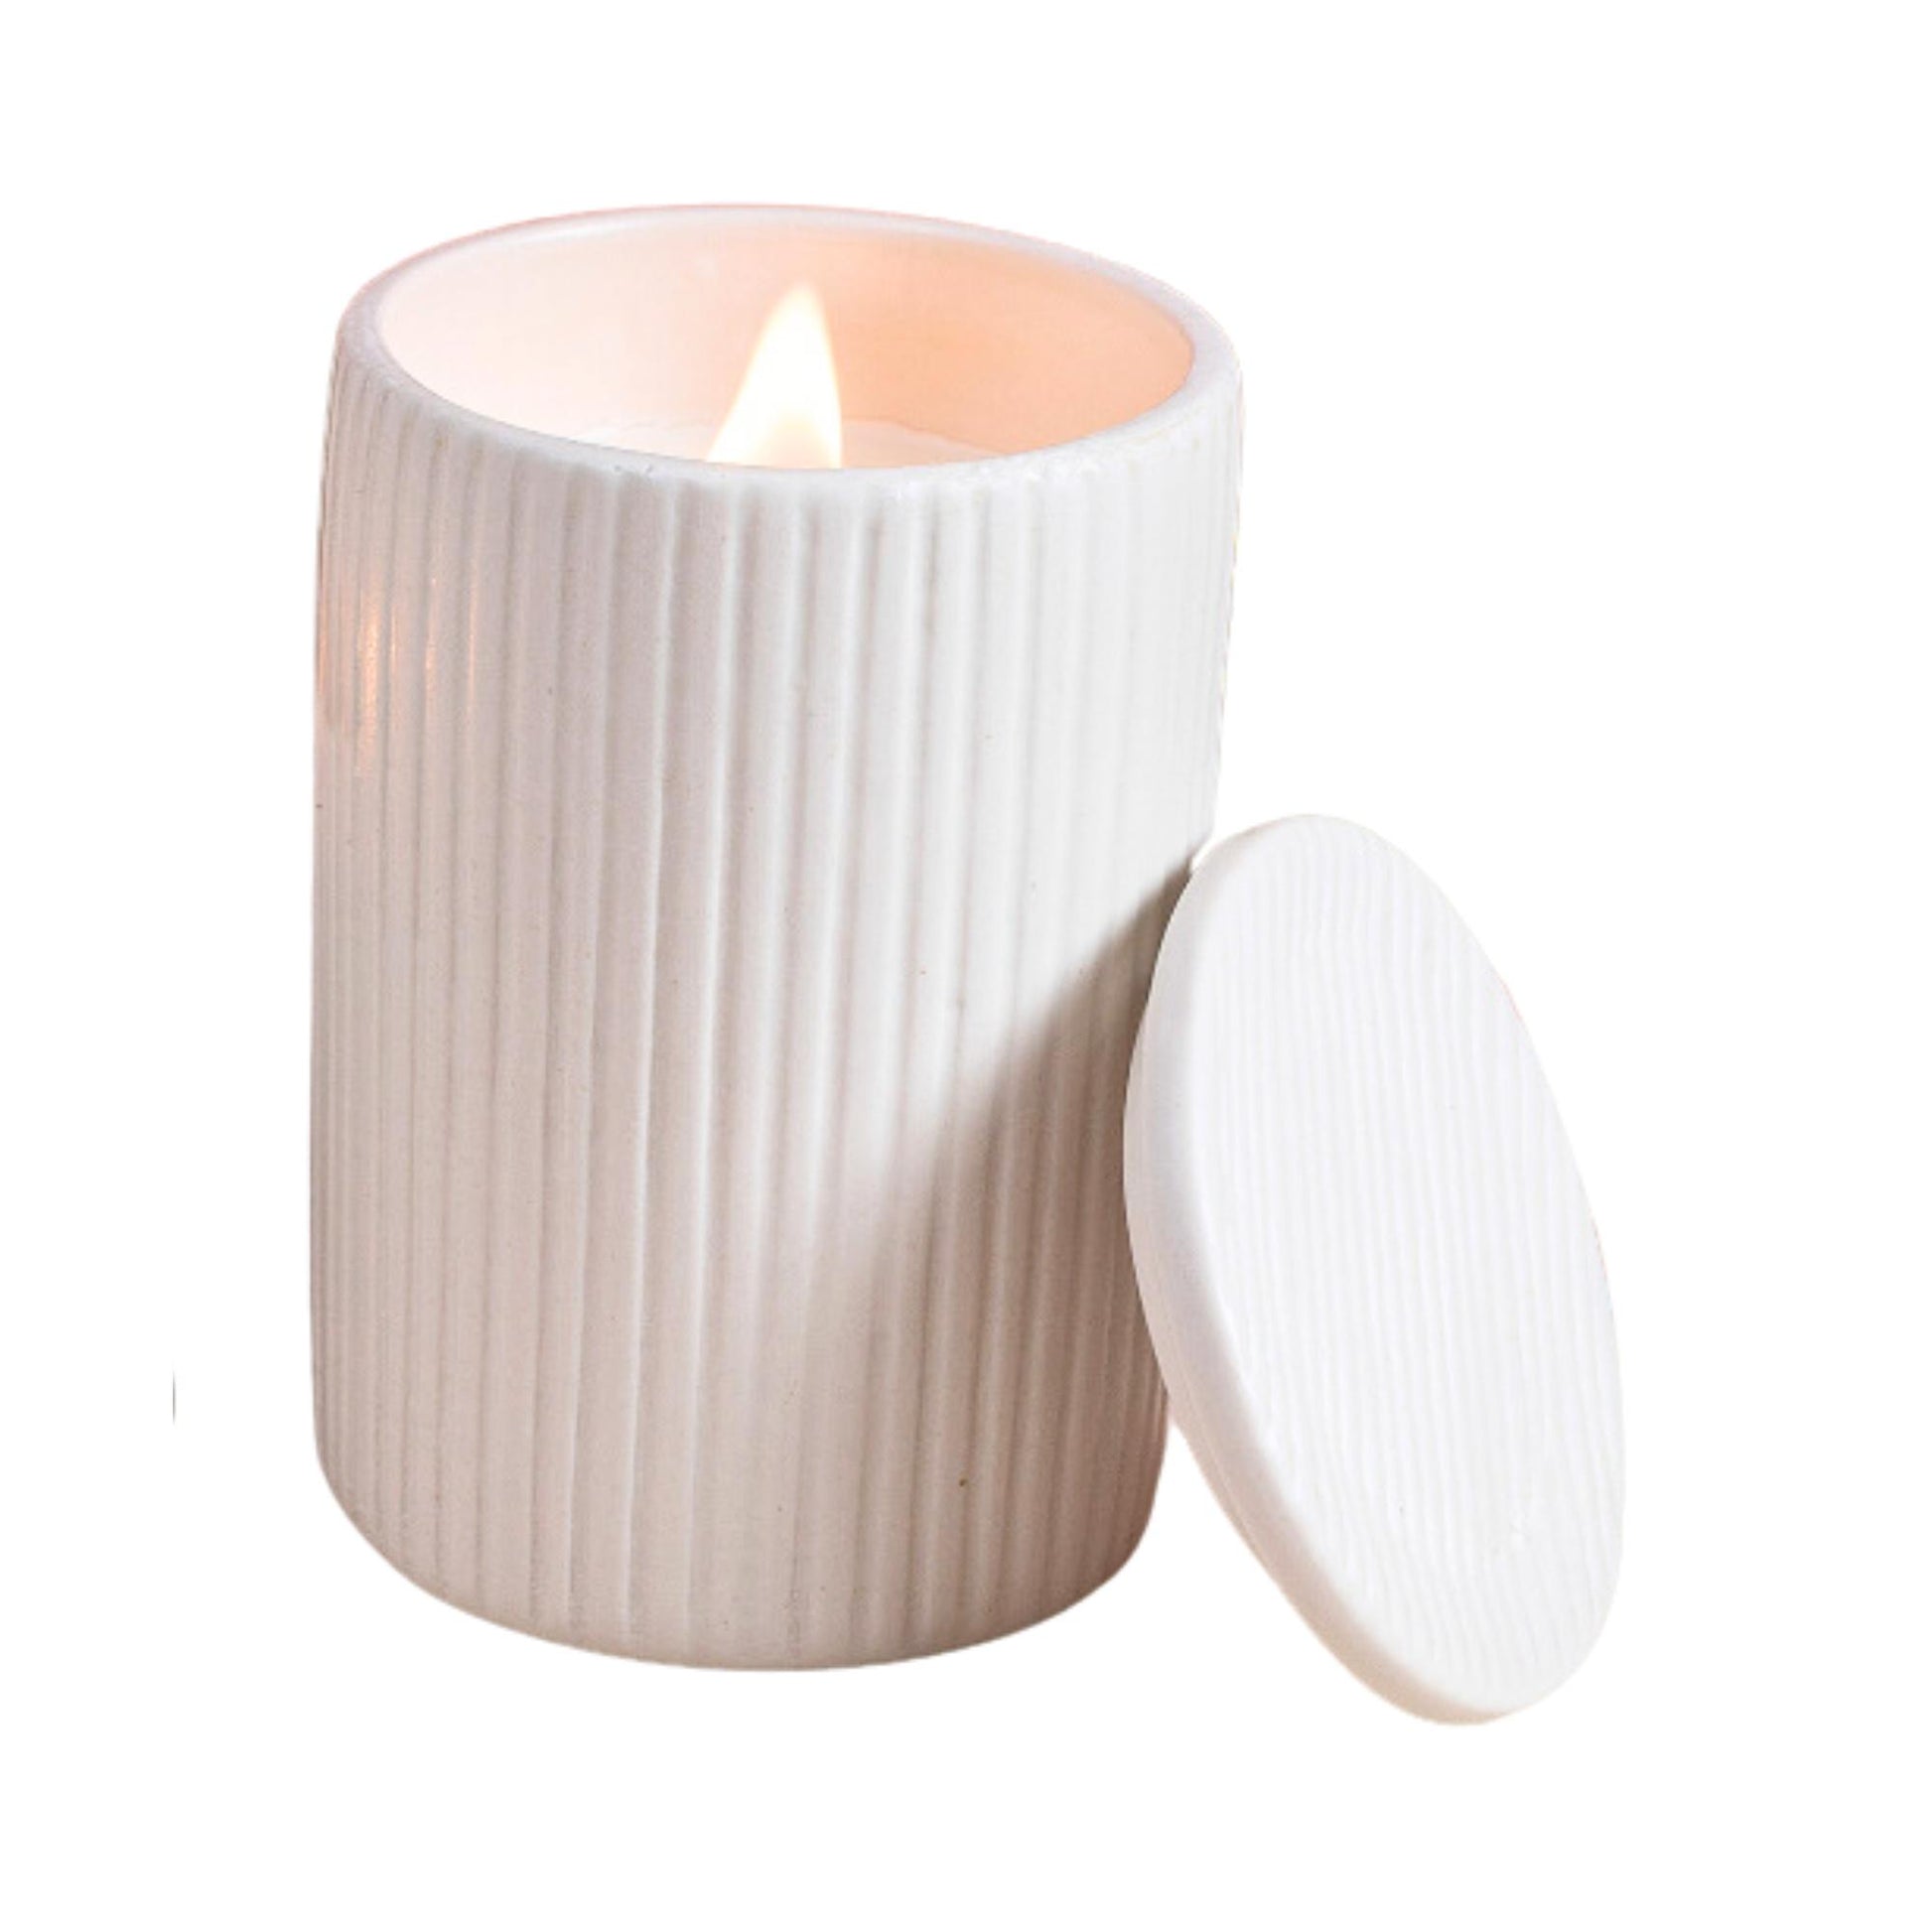 White Candle